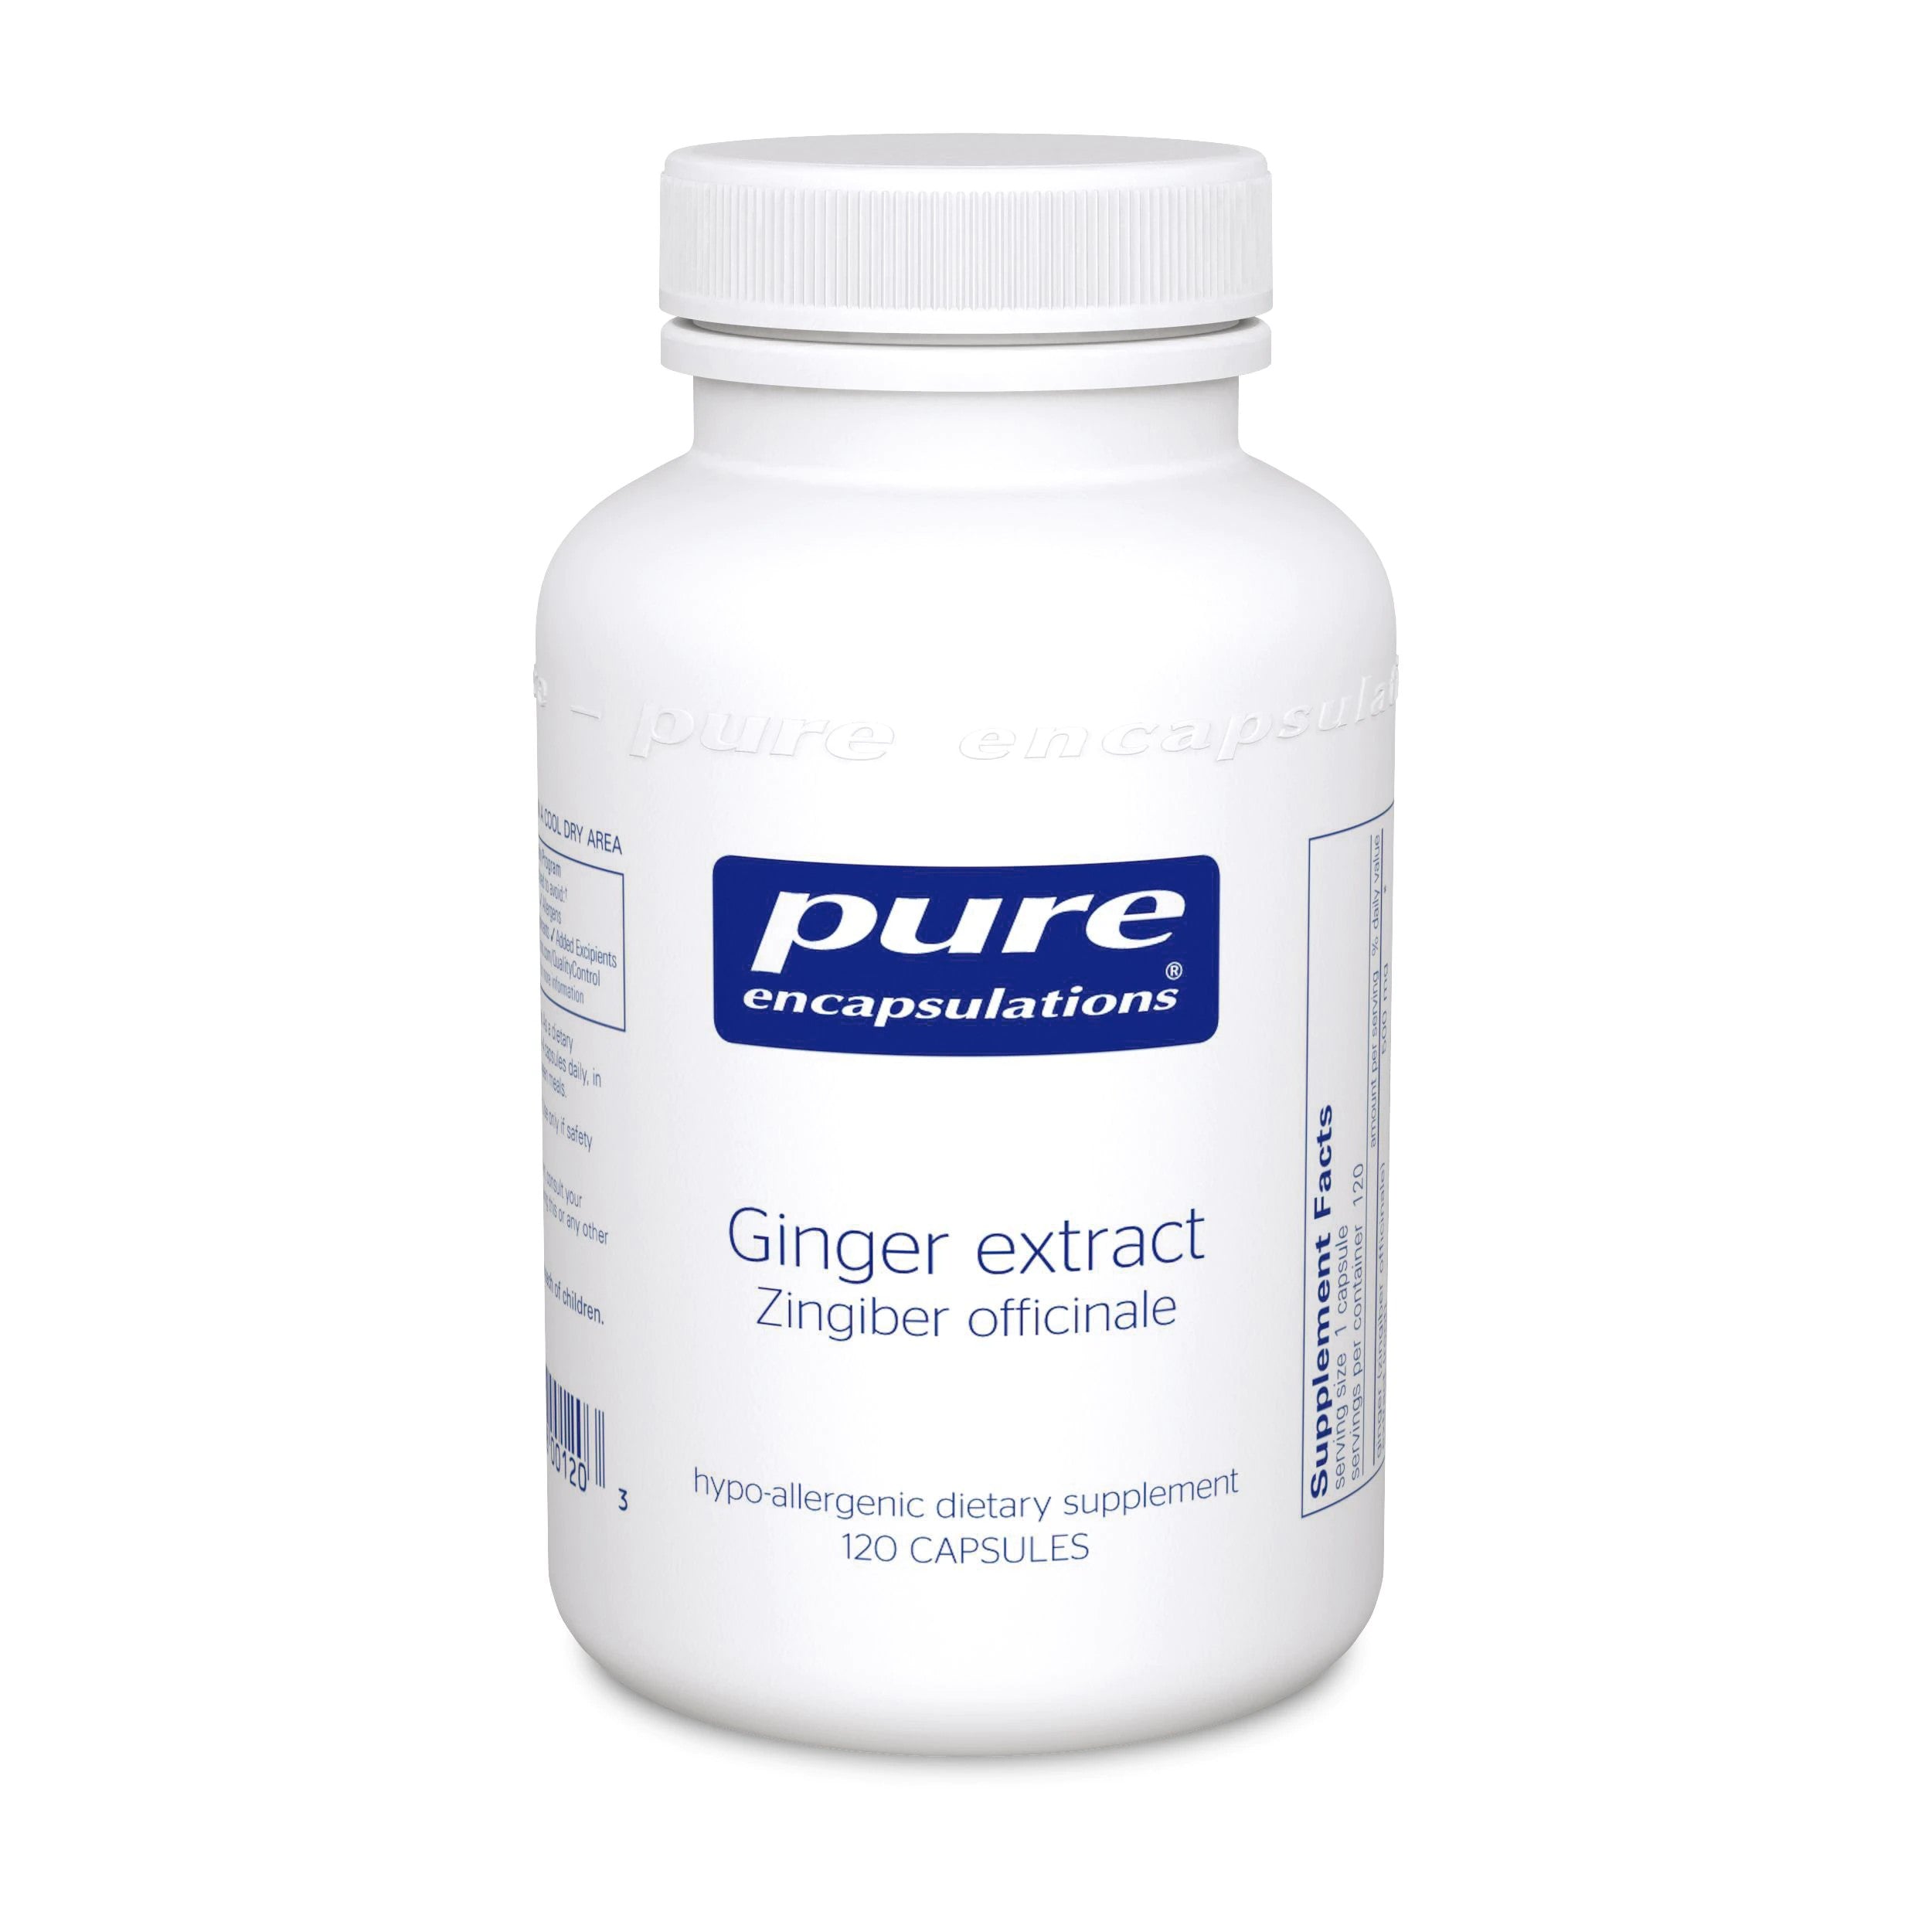 Pure Encapsulations Ginger Extract